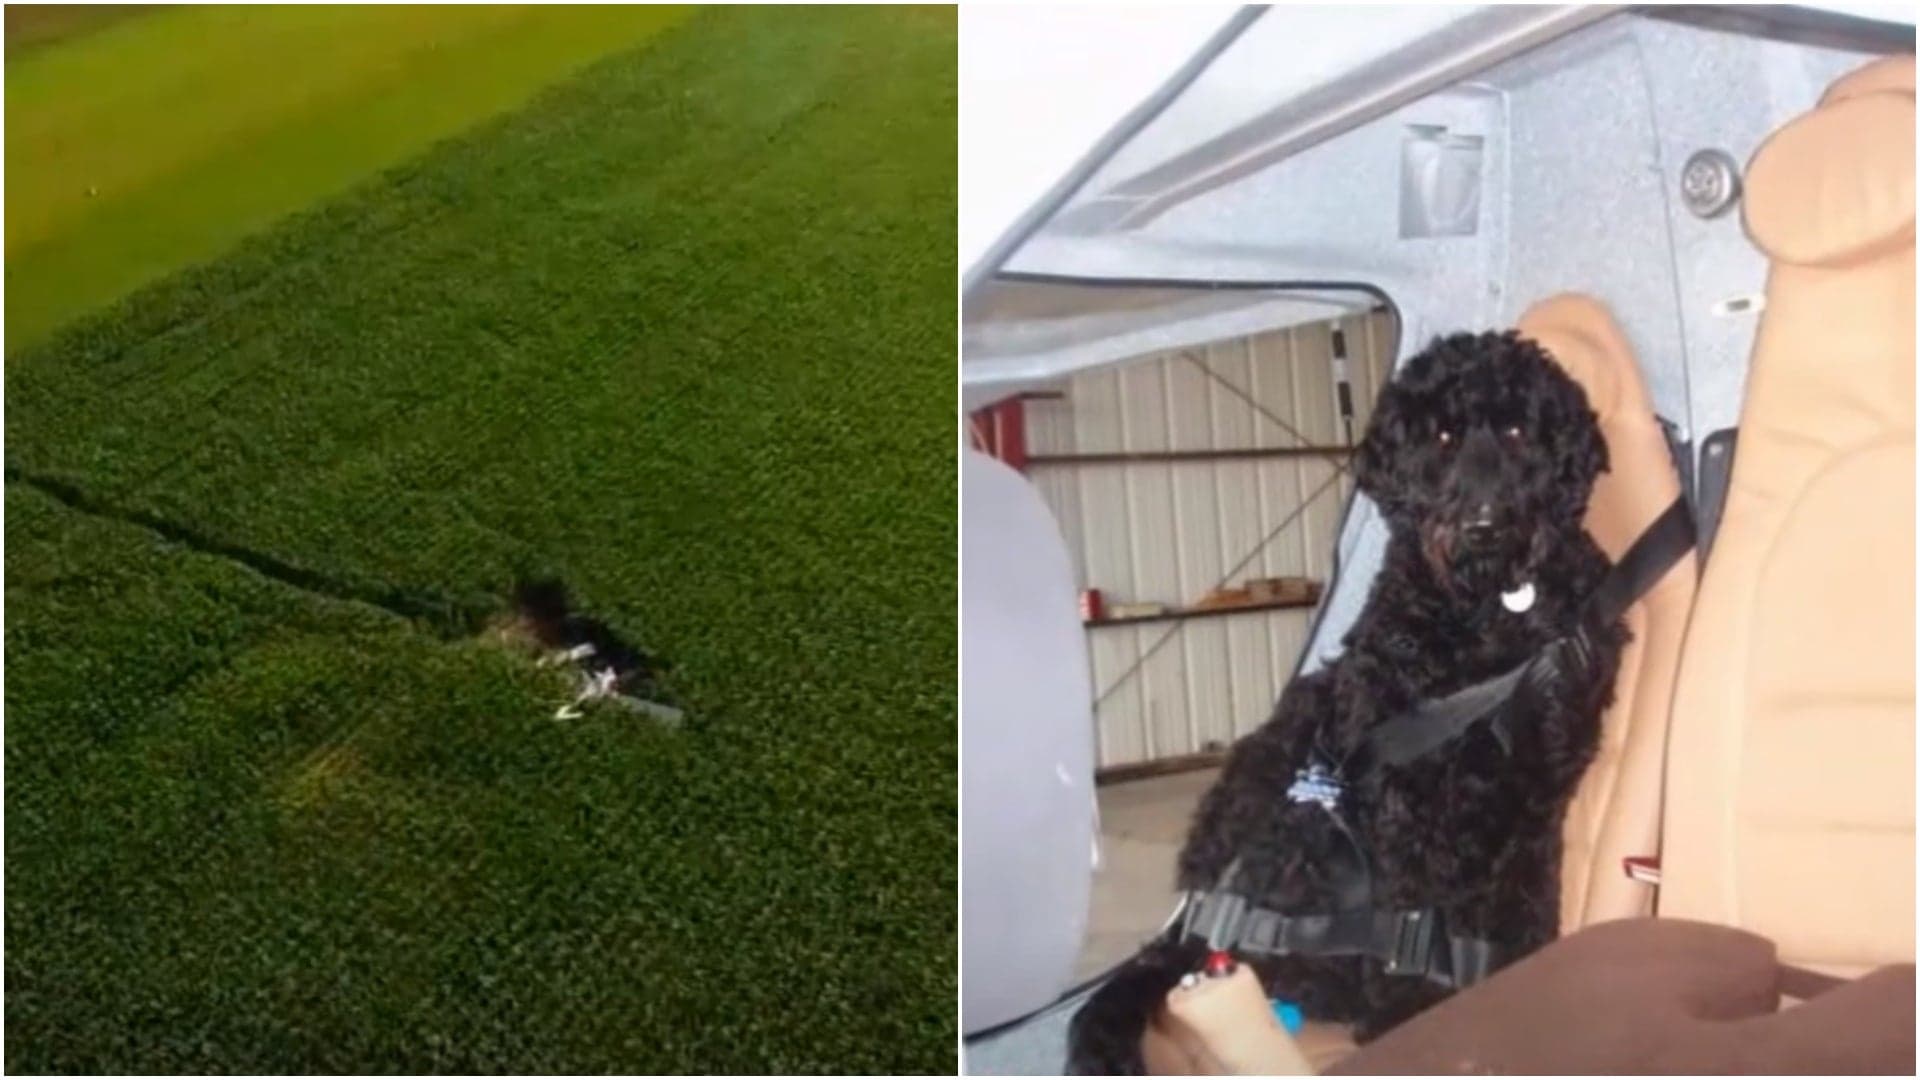 90-Year-Old Pilot Crashes Airplane After Dog Co-Pilot Interferes With Controls During Flight